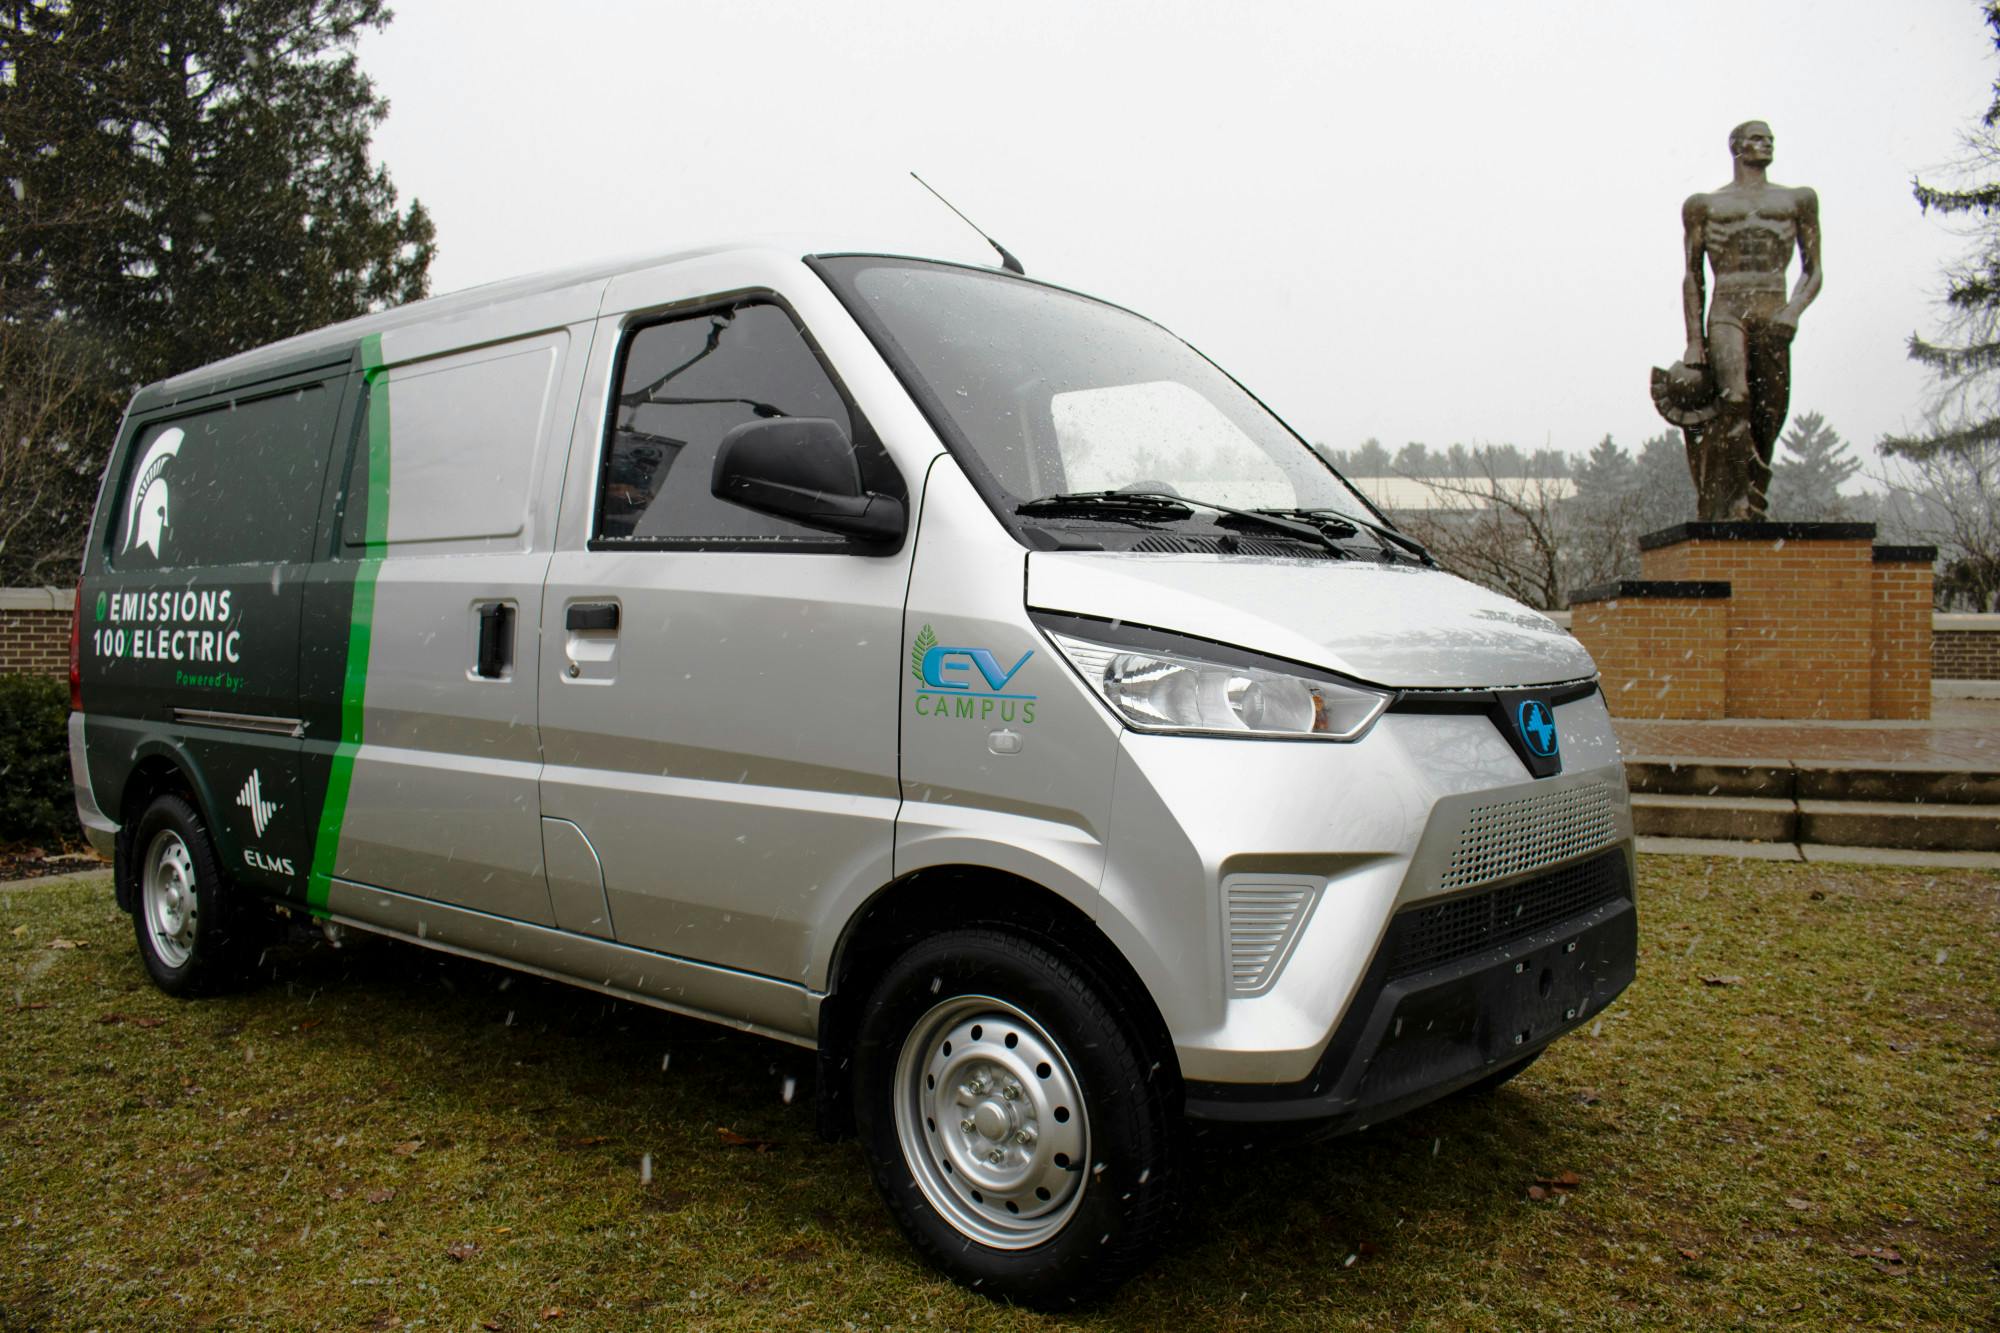 <p>The new all-electric van arrives on campus on Monday, Dec. 6. The vehicle is specially wrapped with the MSU logo. Photo courtesy of the Electric Last Mile Solutions.</p>